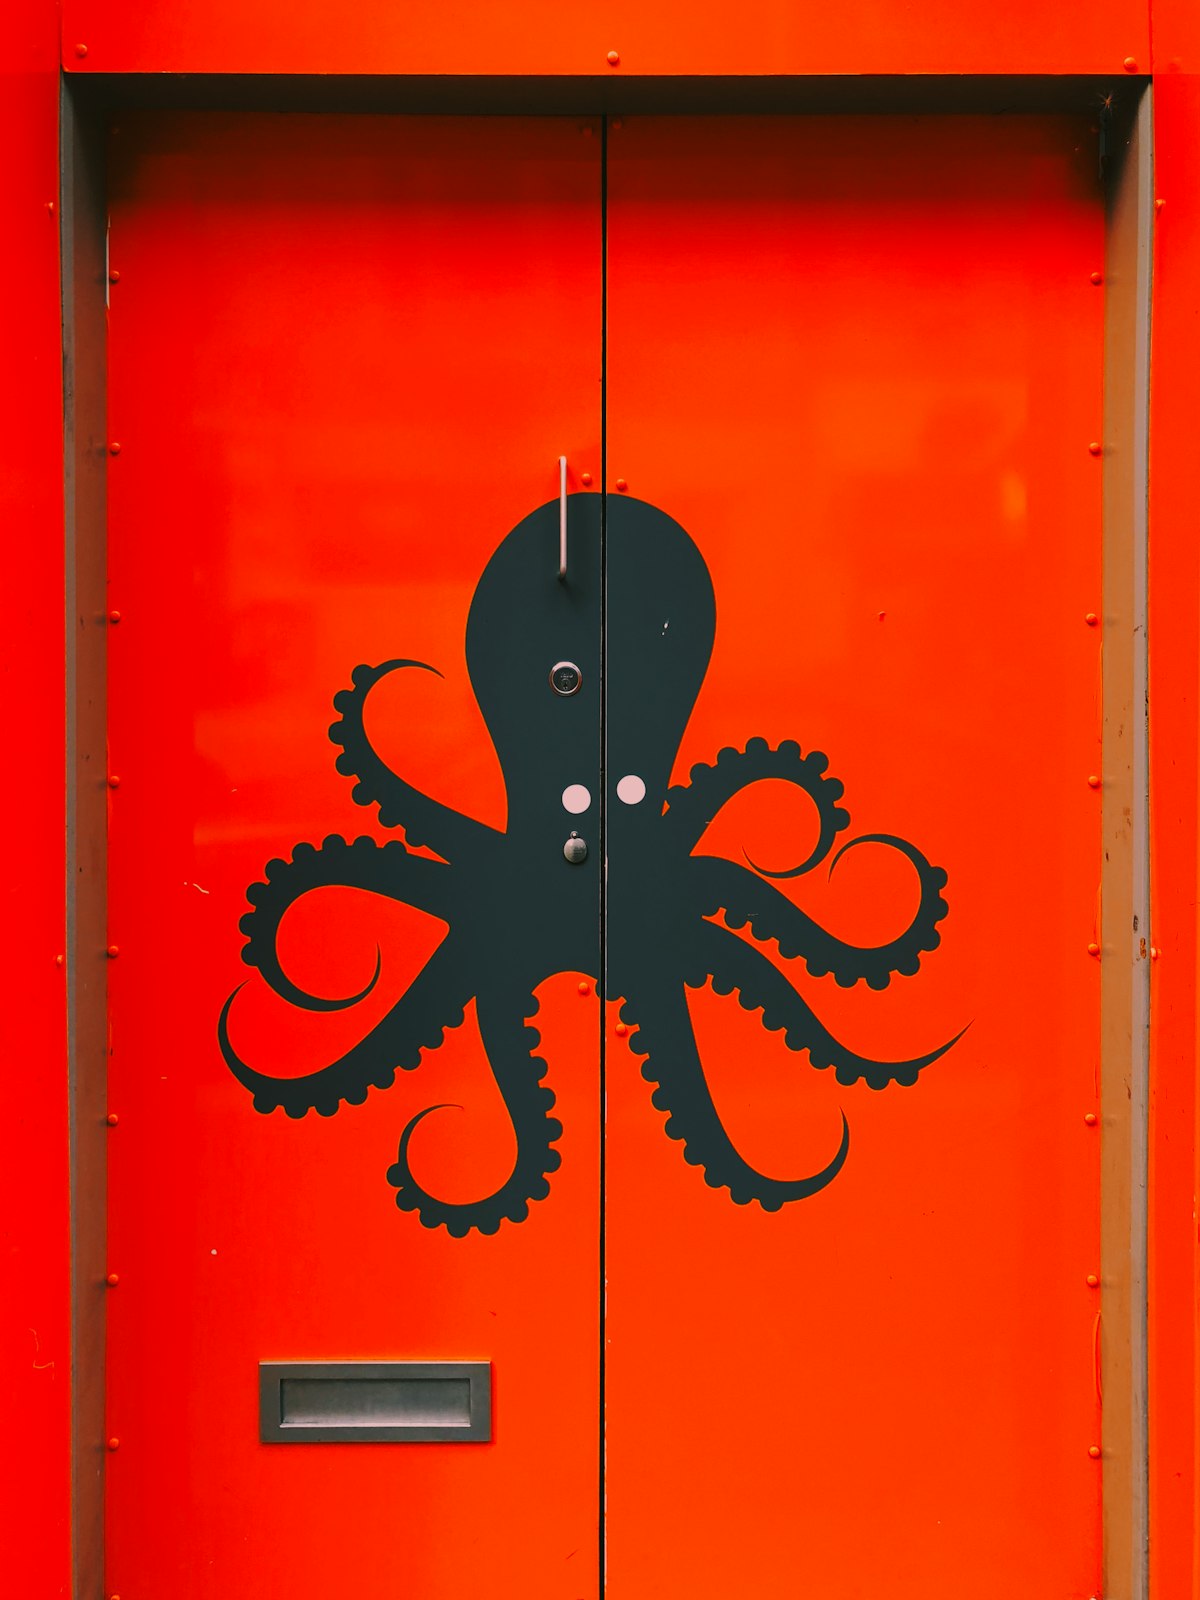 A black graphic of an octopus painted on a bright, red door.